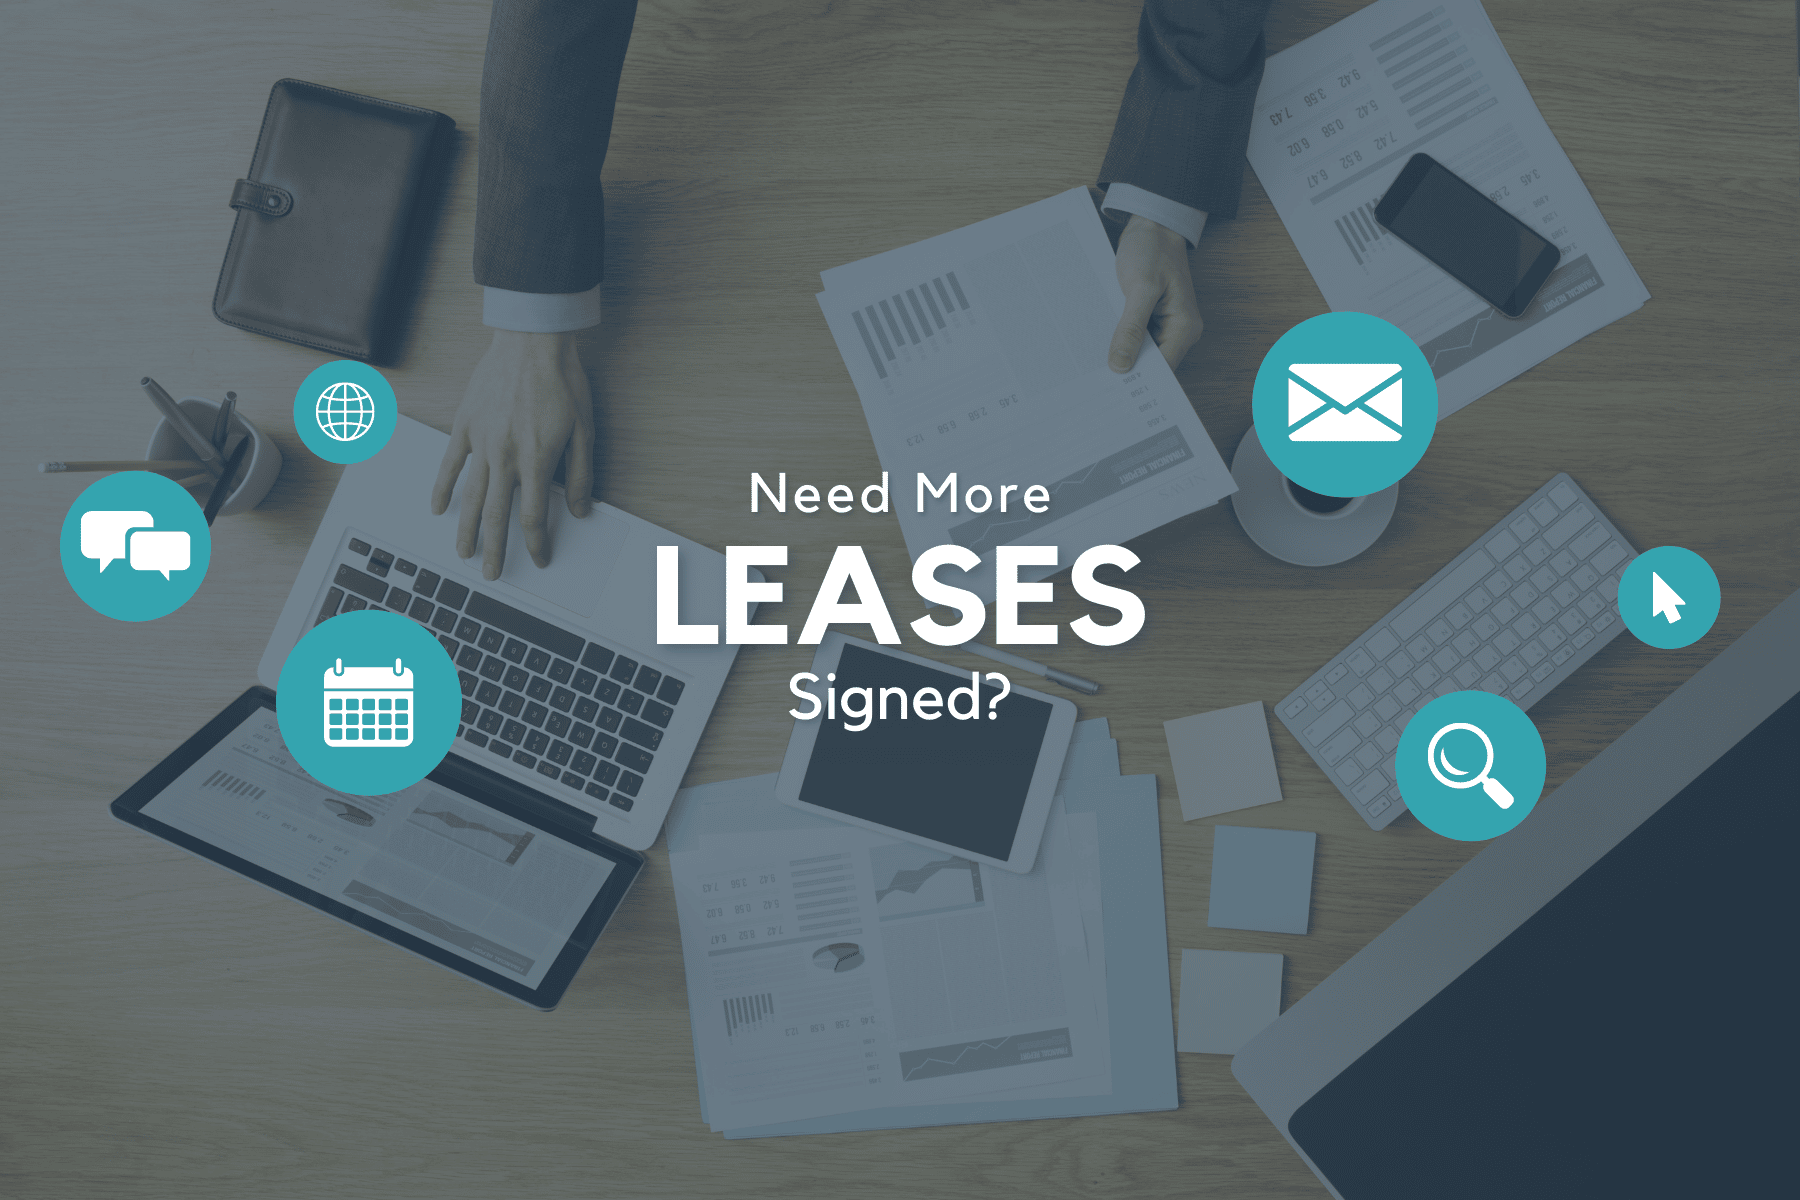 Need More Leases Signed? Summerfield Property Management's Lead Management systems for Multifamily housing